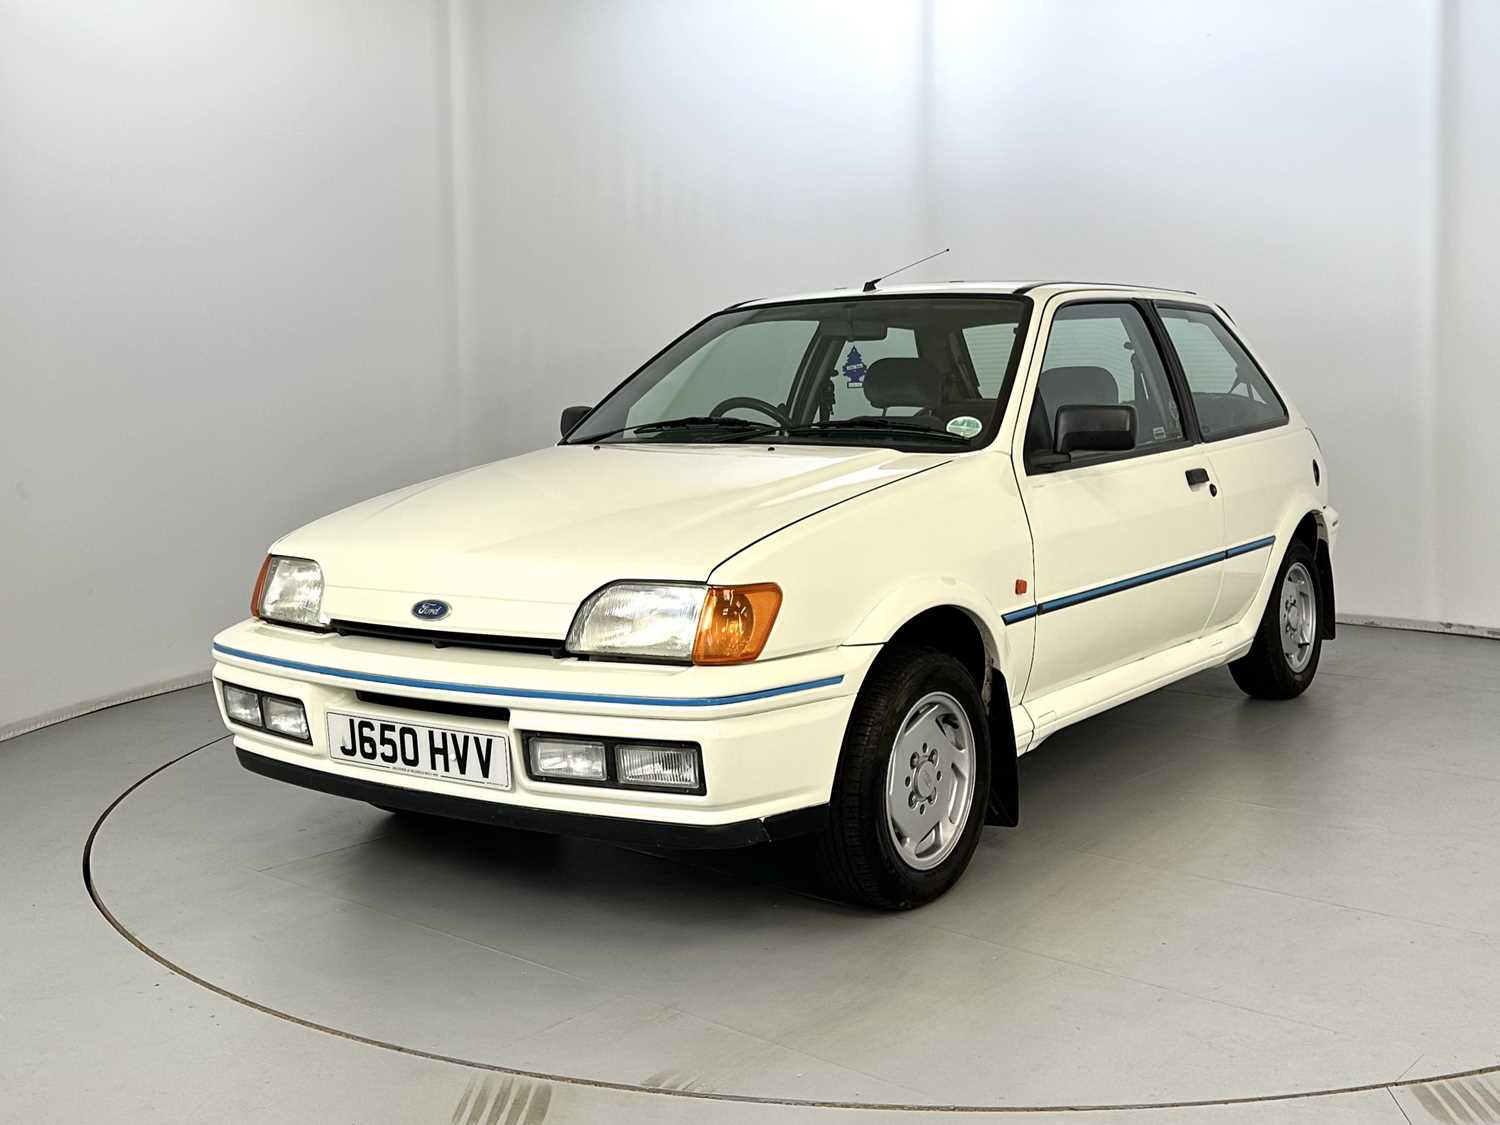 1991 Ford Fiesta XR2i - Image 3 of 30